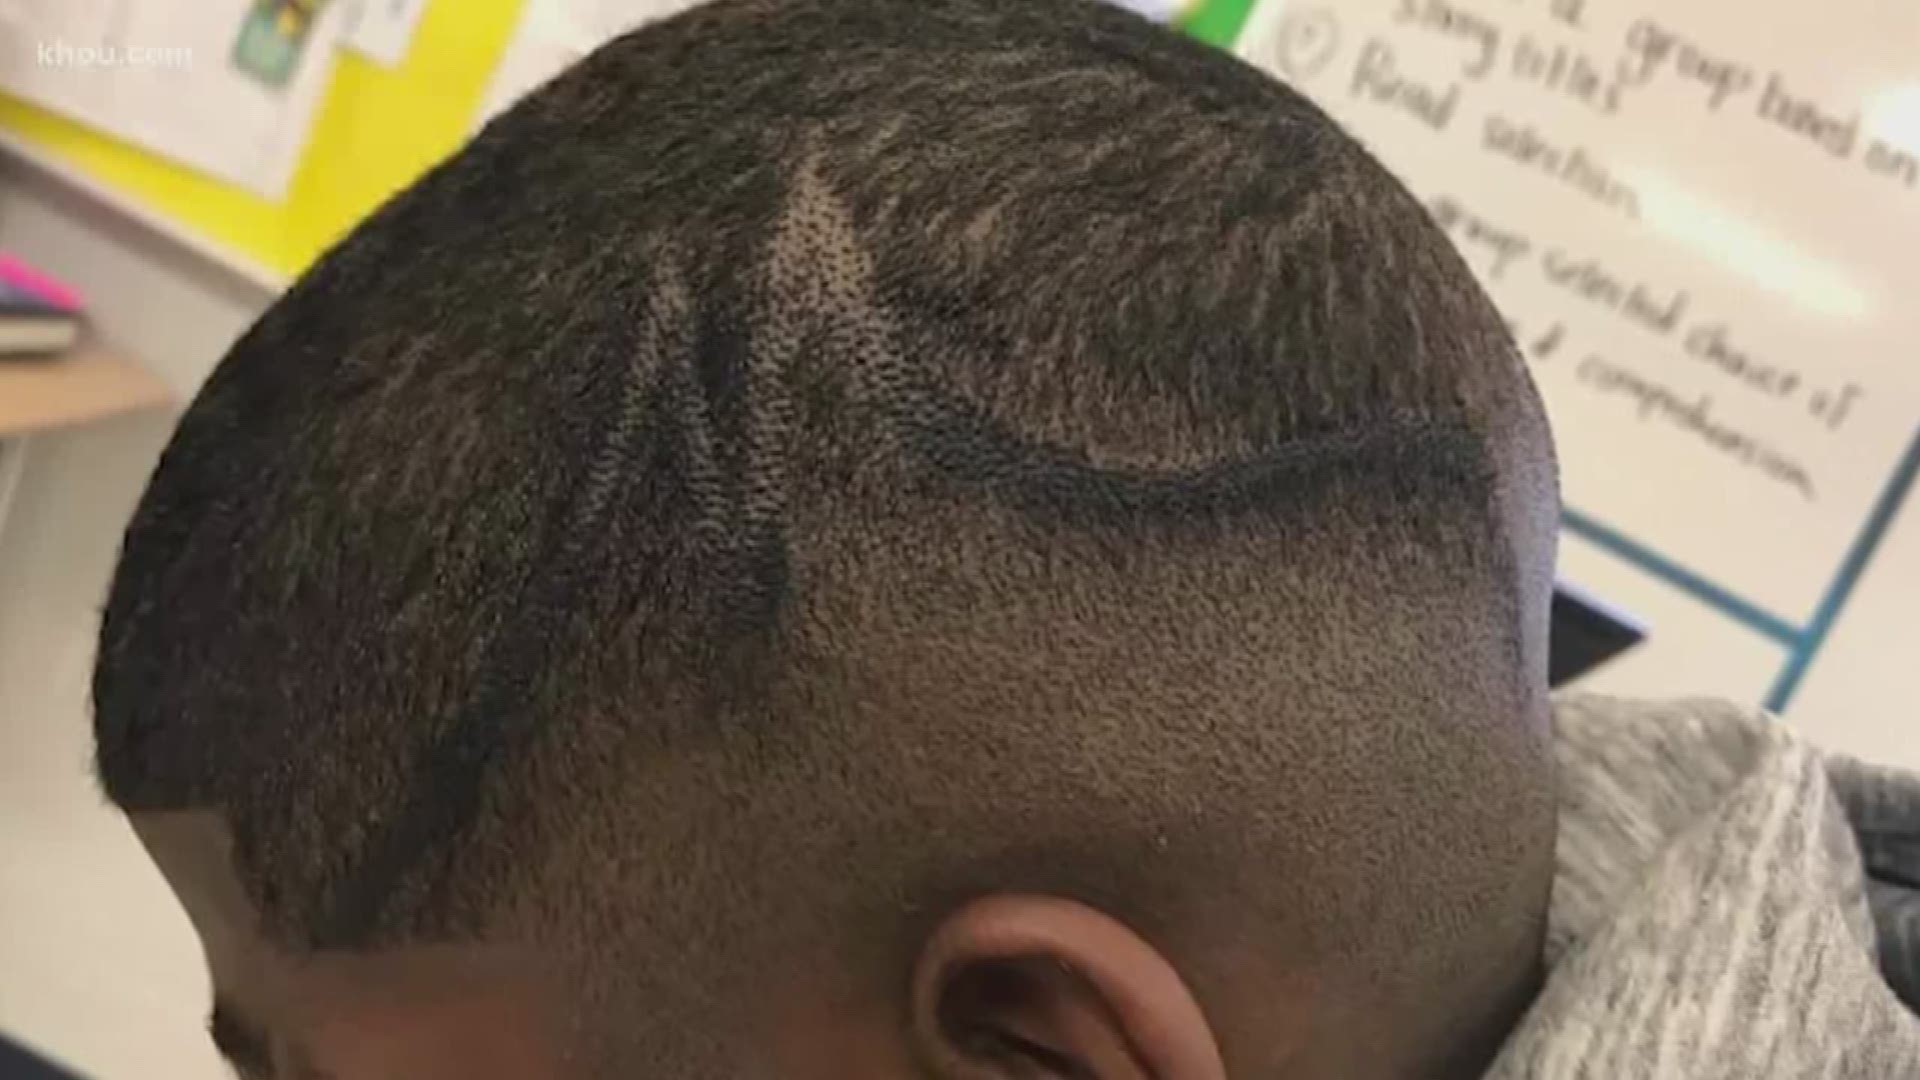 Three Pearland school officials are being sued along with the school district after the employees filled in a seventh-grade student's hair design with a black Sharpie earlier this year.